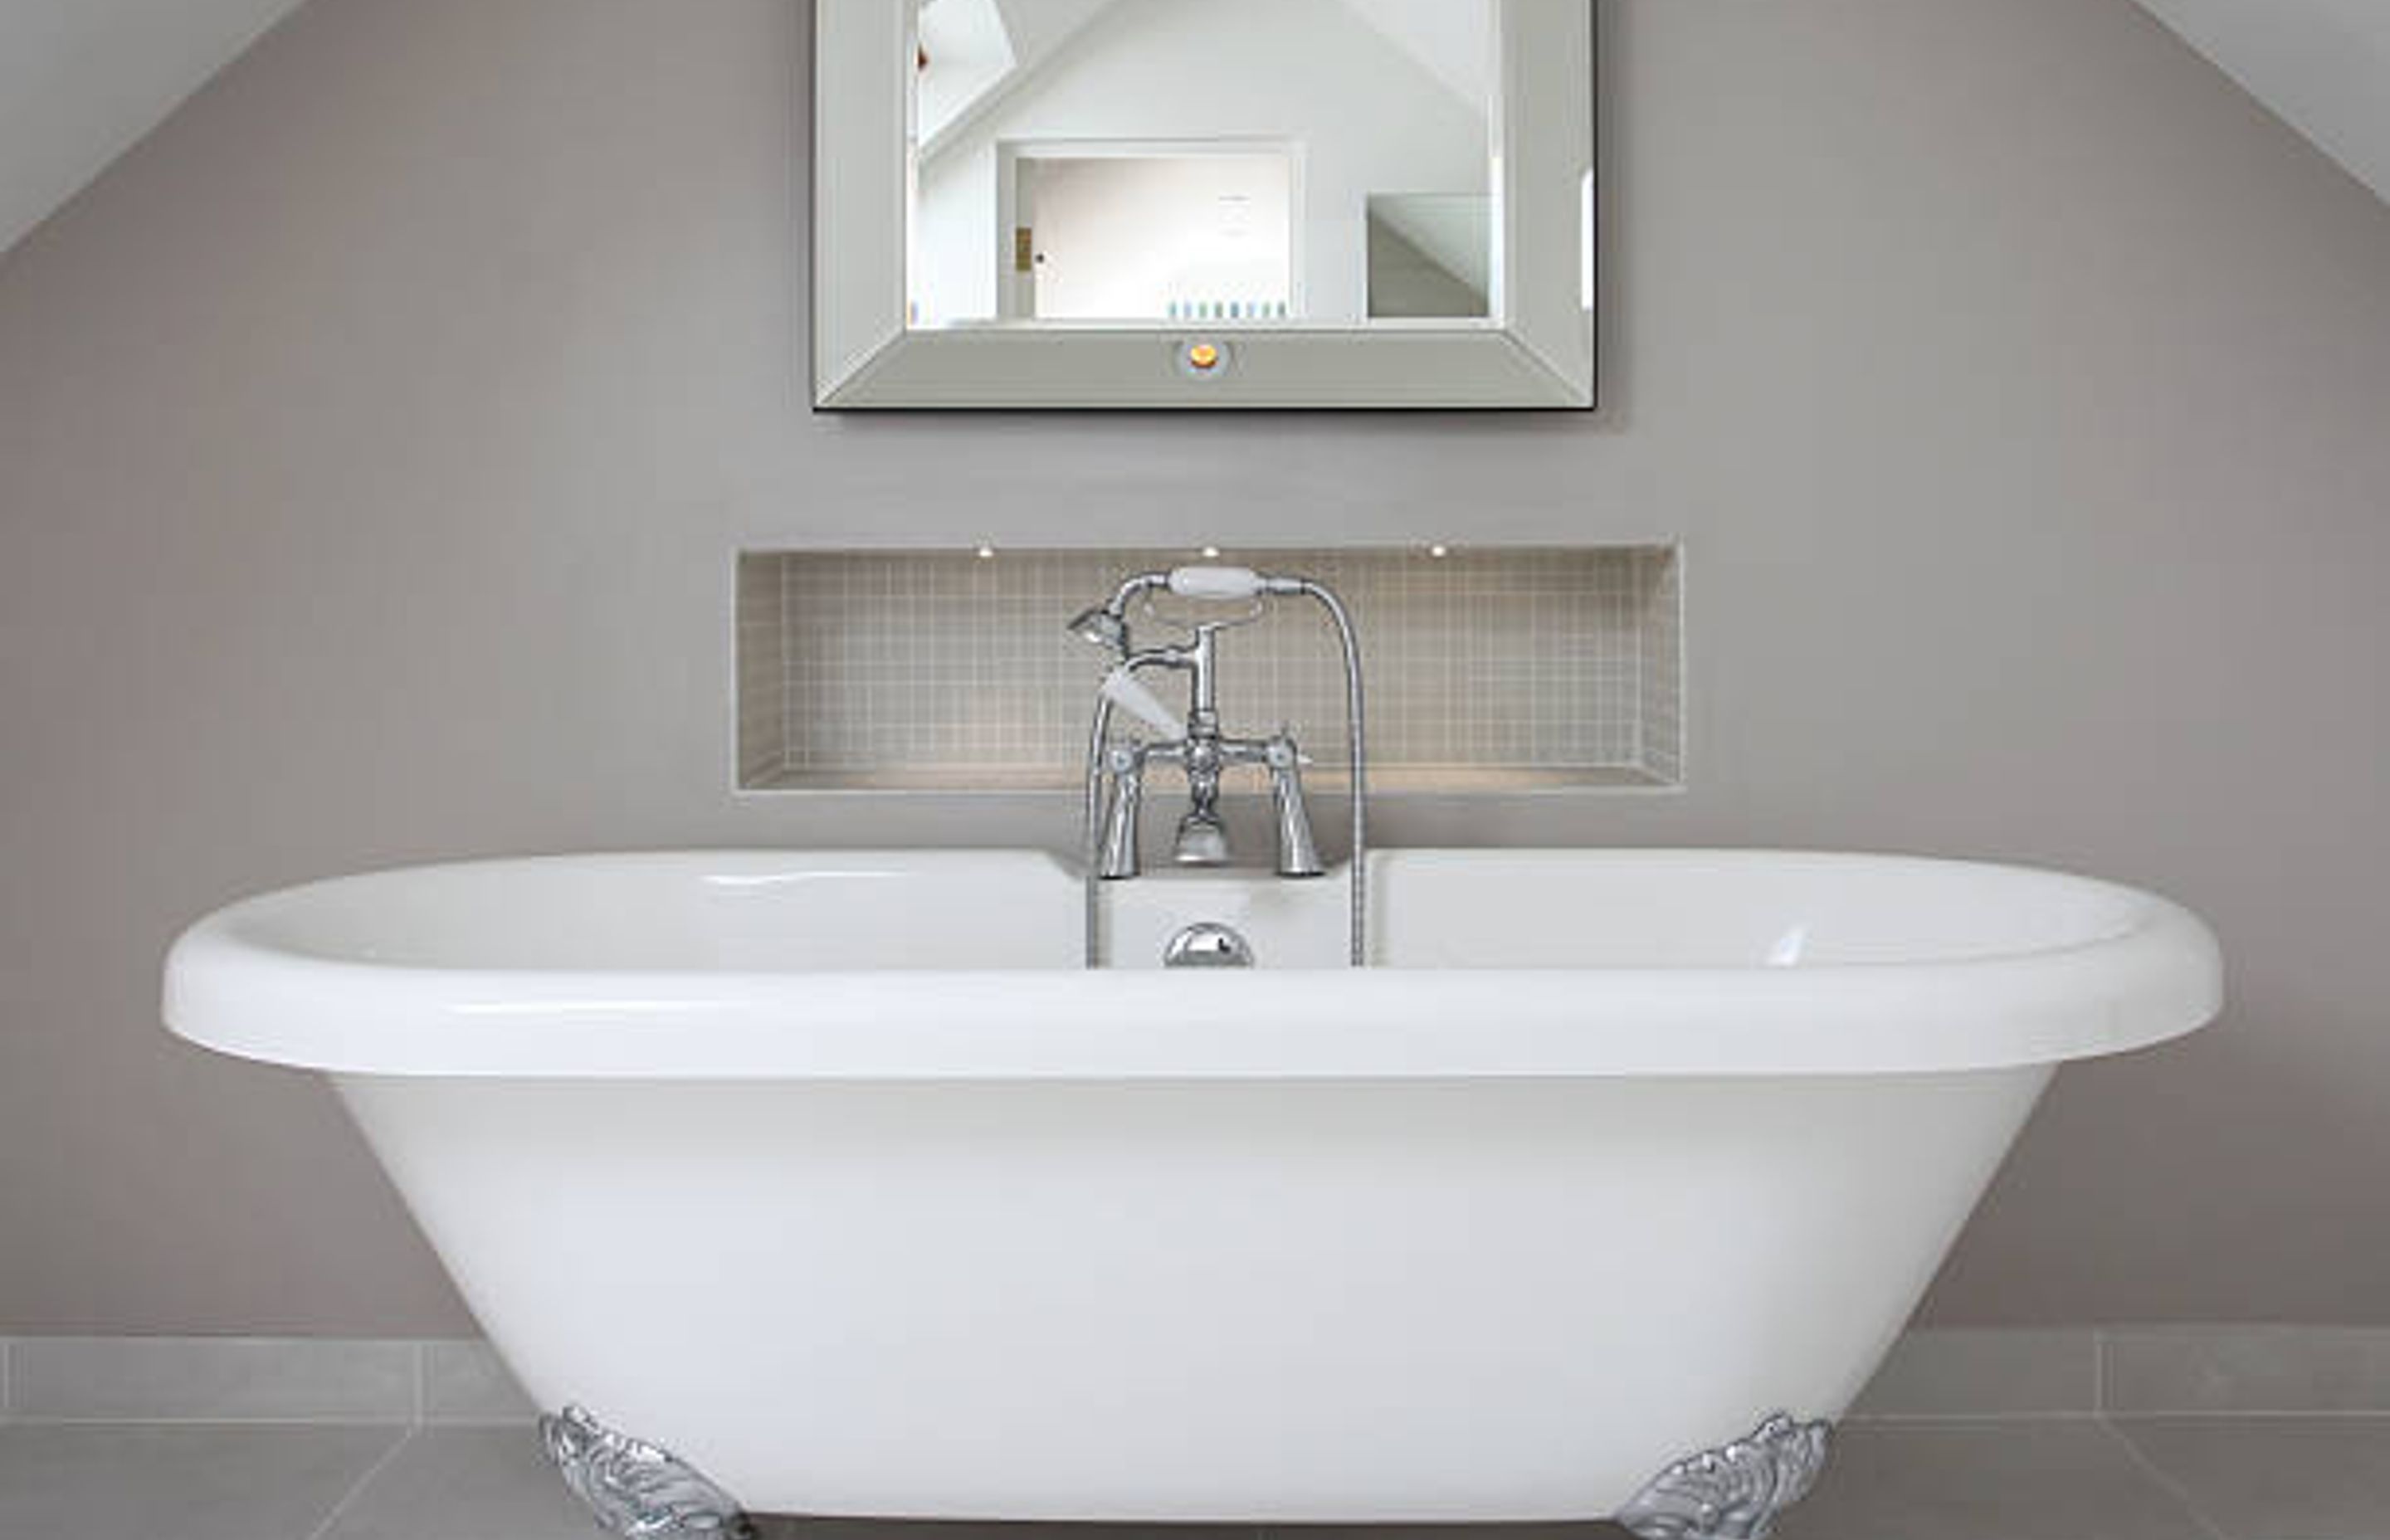 Example of claw foot tub | Photo Credit - iStock